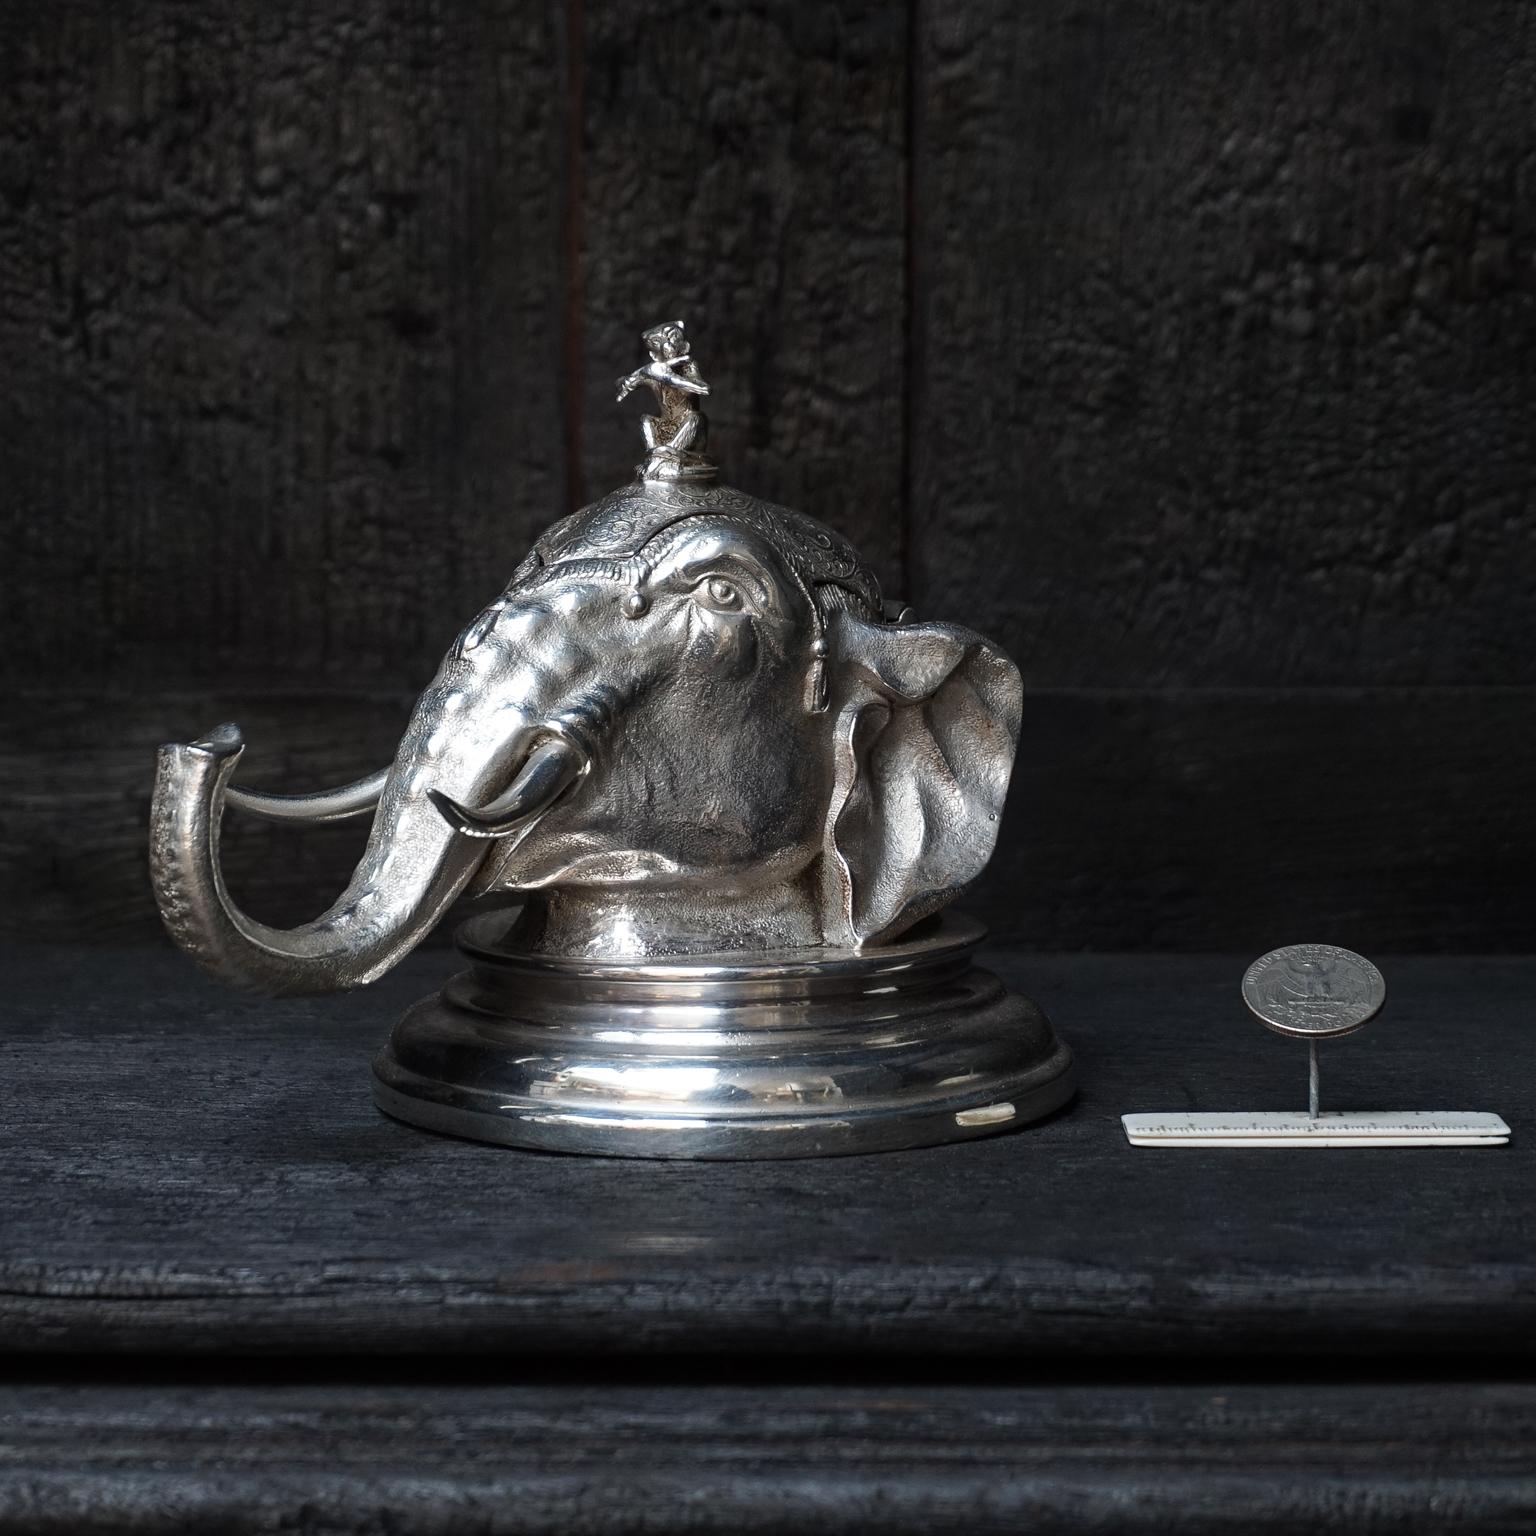 Victorian 19th Century English Silver Plated Elephant Inkwell with Little Monkey